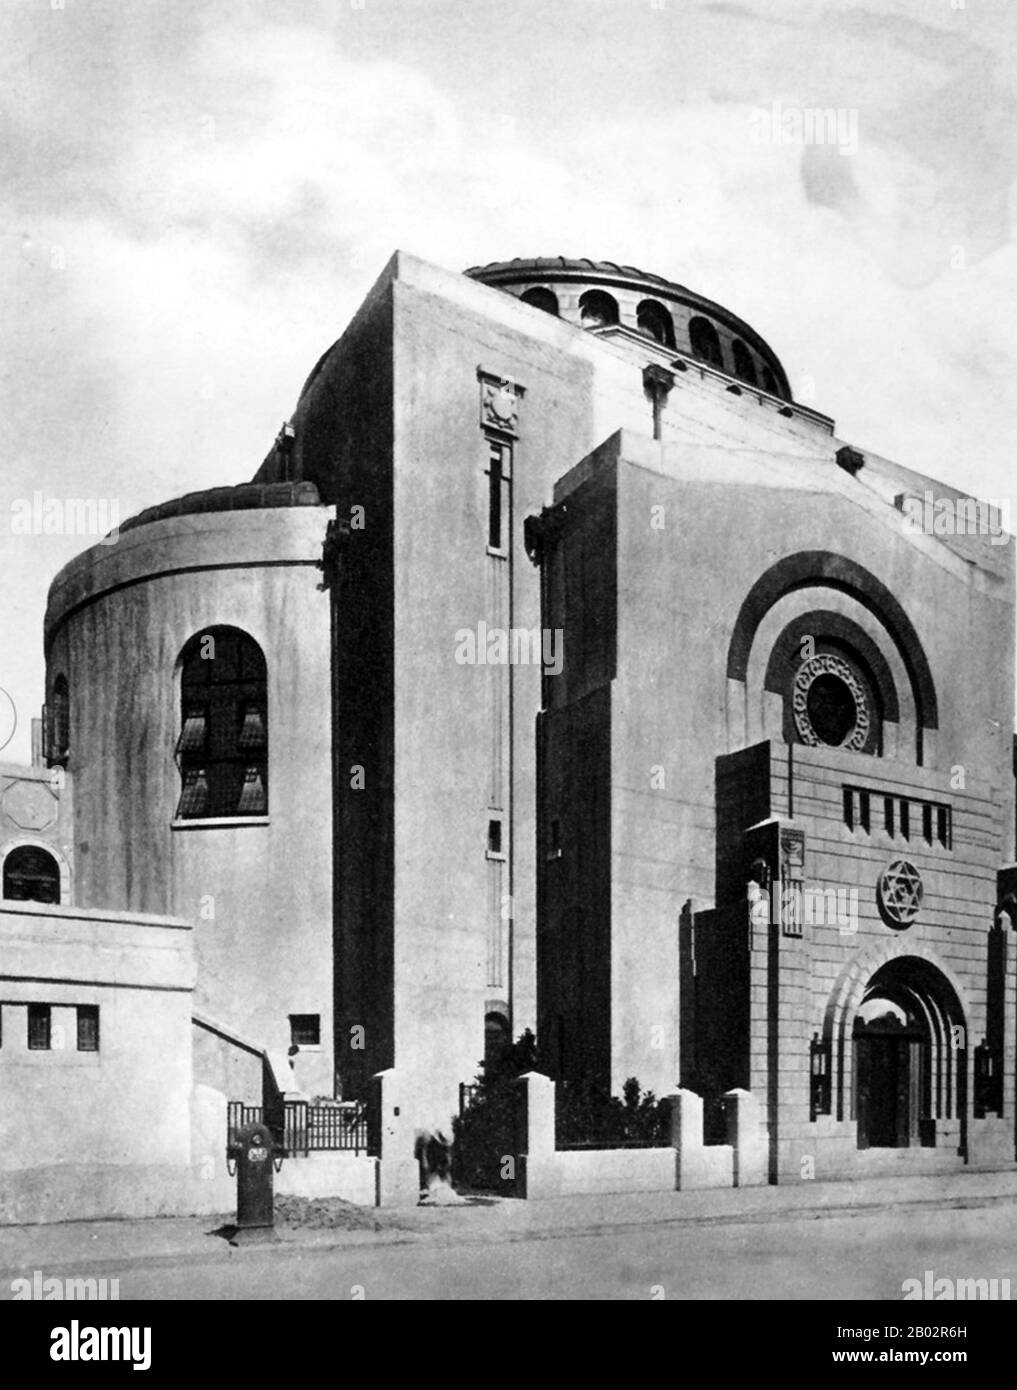 The Beth Aharon Sephardi Synagogue was built in 1927 by the prominent Jewish businessman Silas Aaron Hardoon, one of the wealthiest people in Shanghai, as a gift to the city's Jewish community. It was named after Hardoon's father, Aaron.  It was located at 20 Museum Road (now 42 Huqiu Road) in the Shanghai International Settlement, near the Bund and Hongkew, in present-day Huangpu District. The synagogue was designed by the architectural firm Palmer and Turner, which also designed the iconic HSBC Building on the Bund.  After the Chinese Communist Party won the Chinese Civil War and established Stock Photo